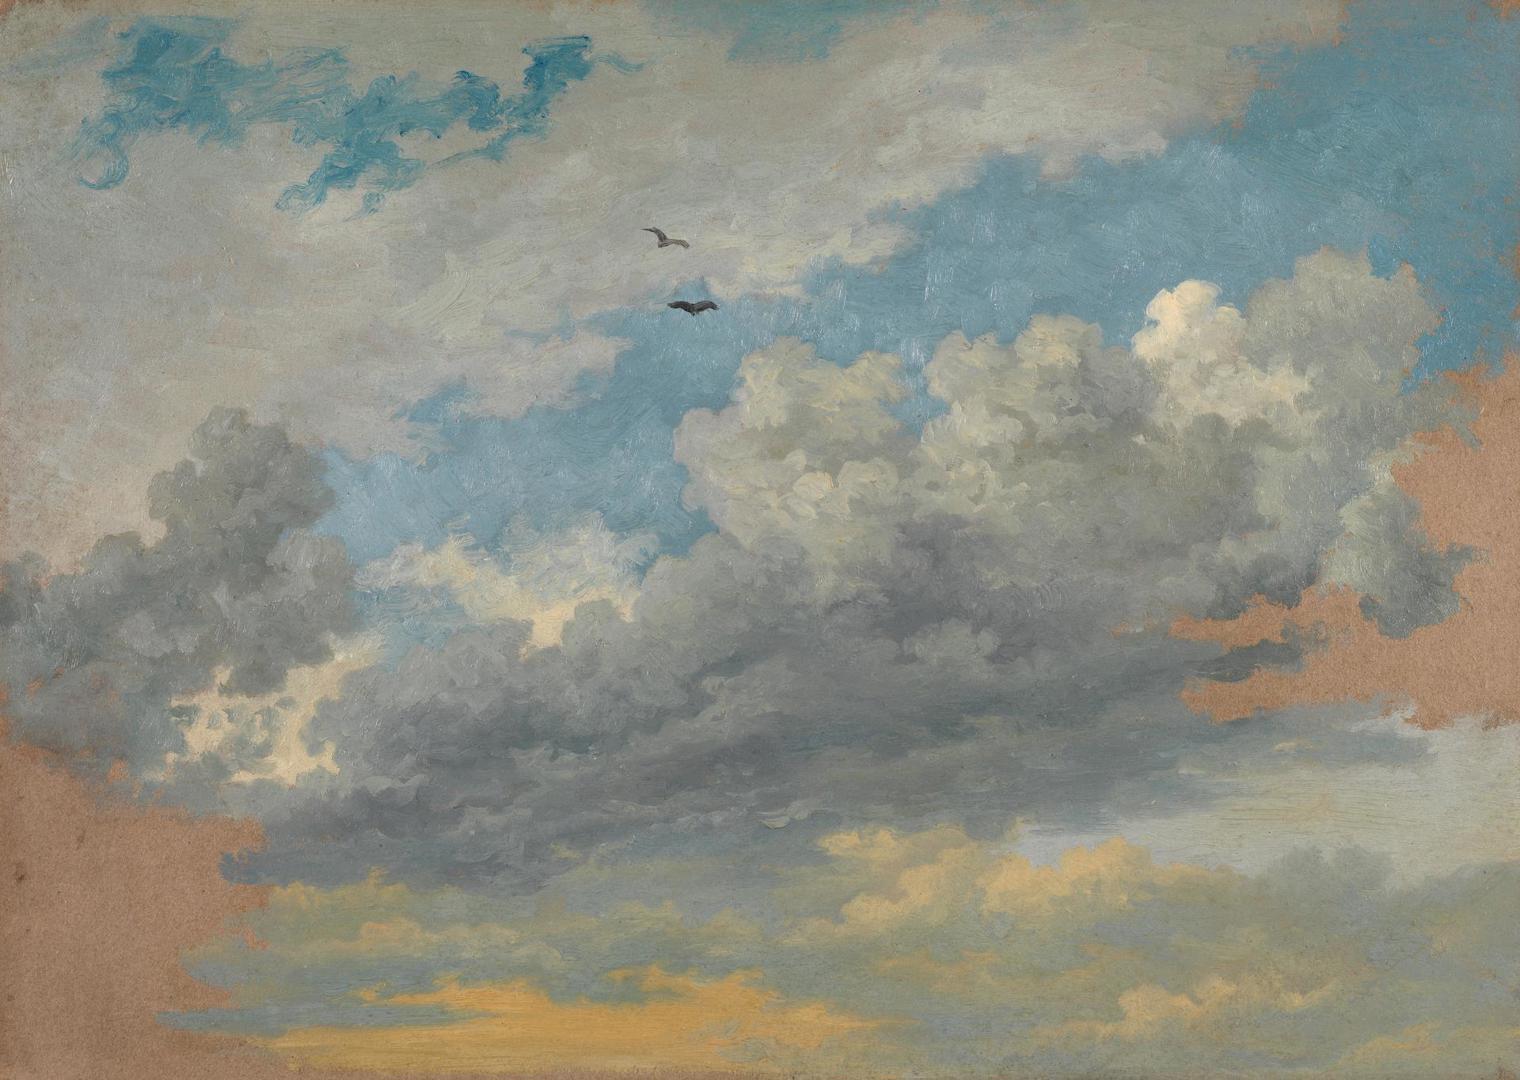 Sky Study with Birds by Jean-Michel Cels